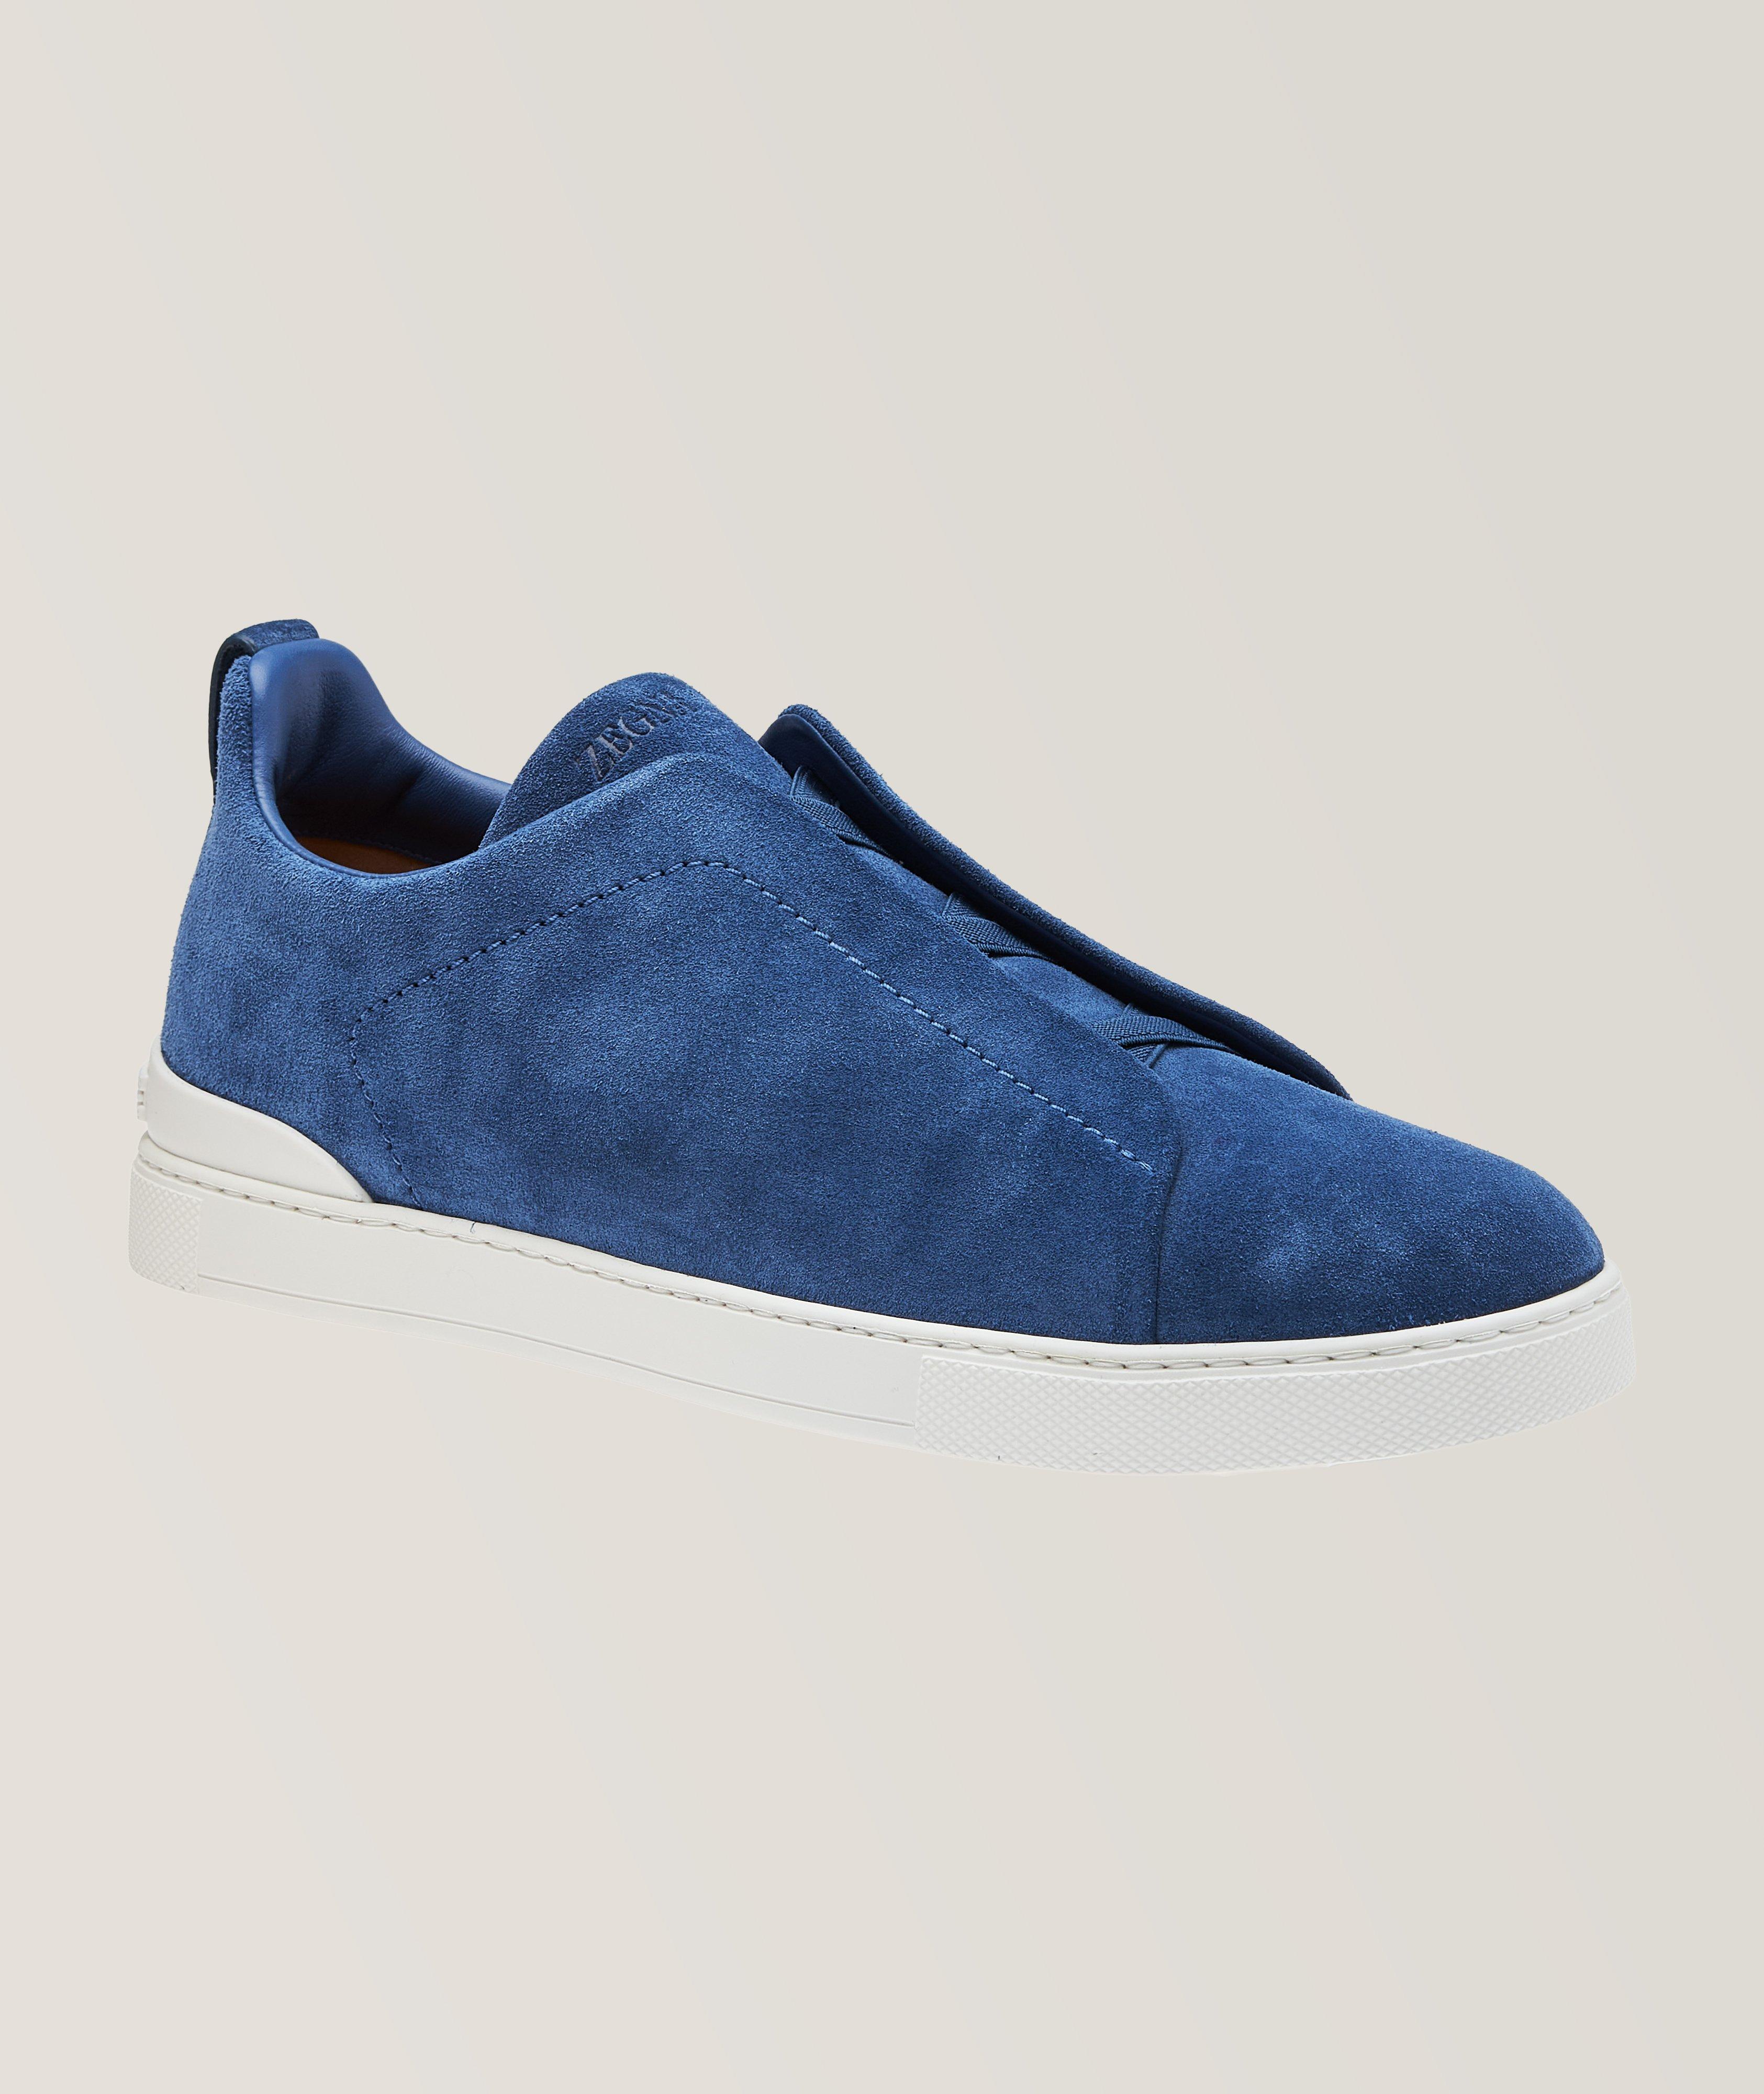 Zegna Triple Stitch Suede Slip-On Sneakers